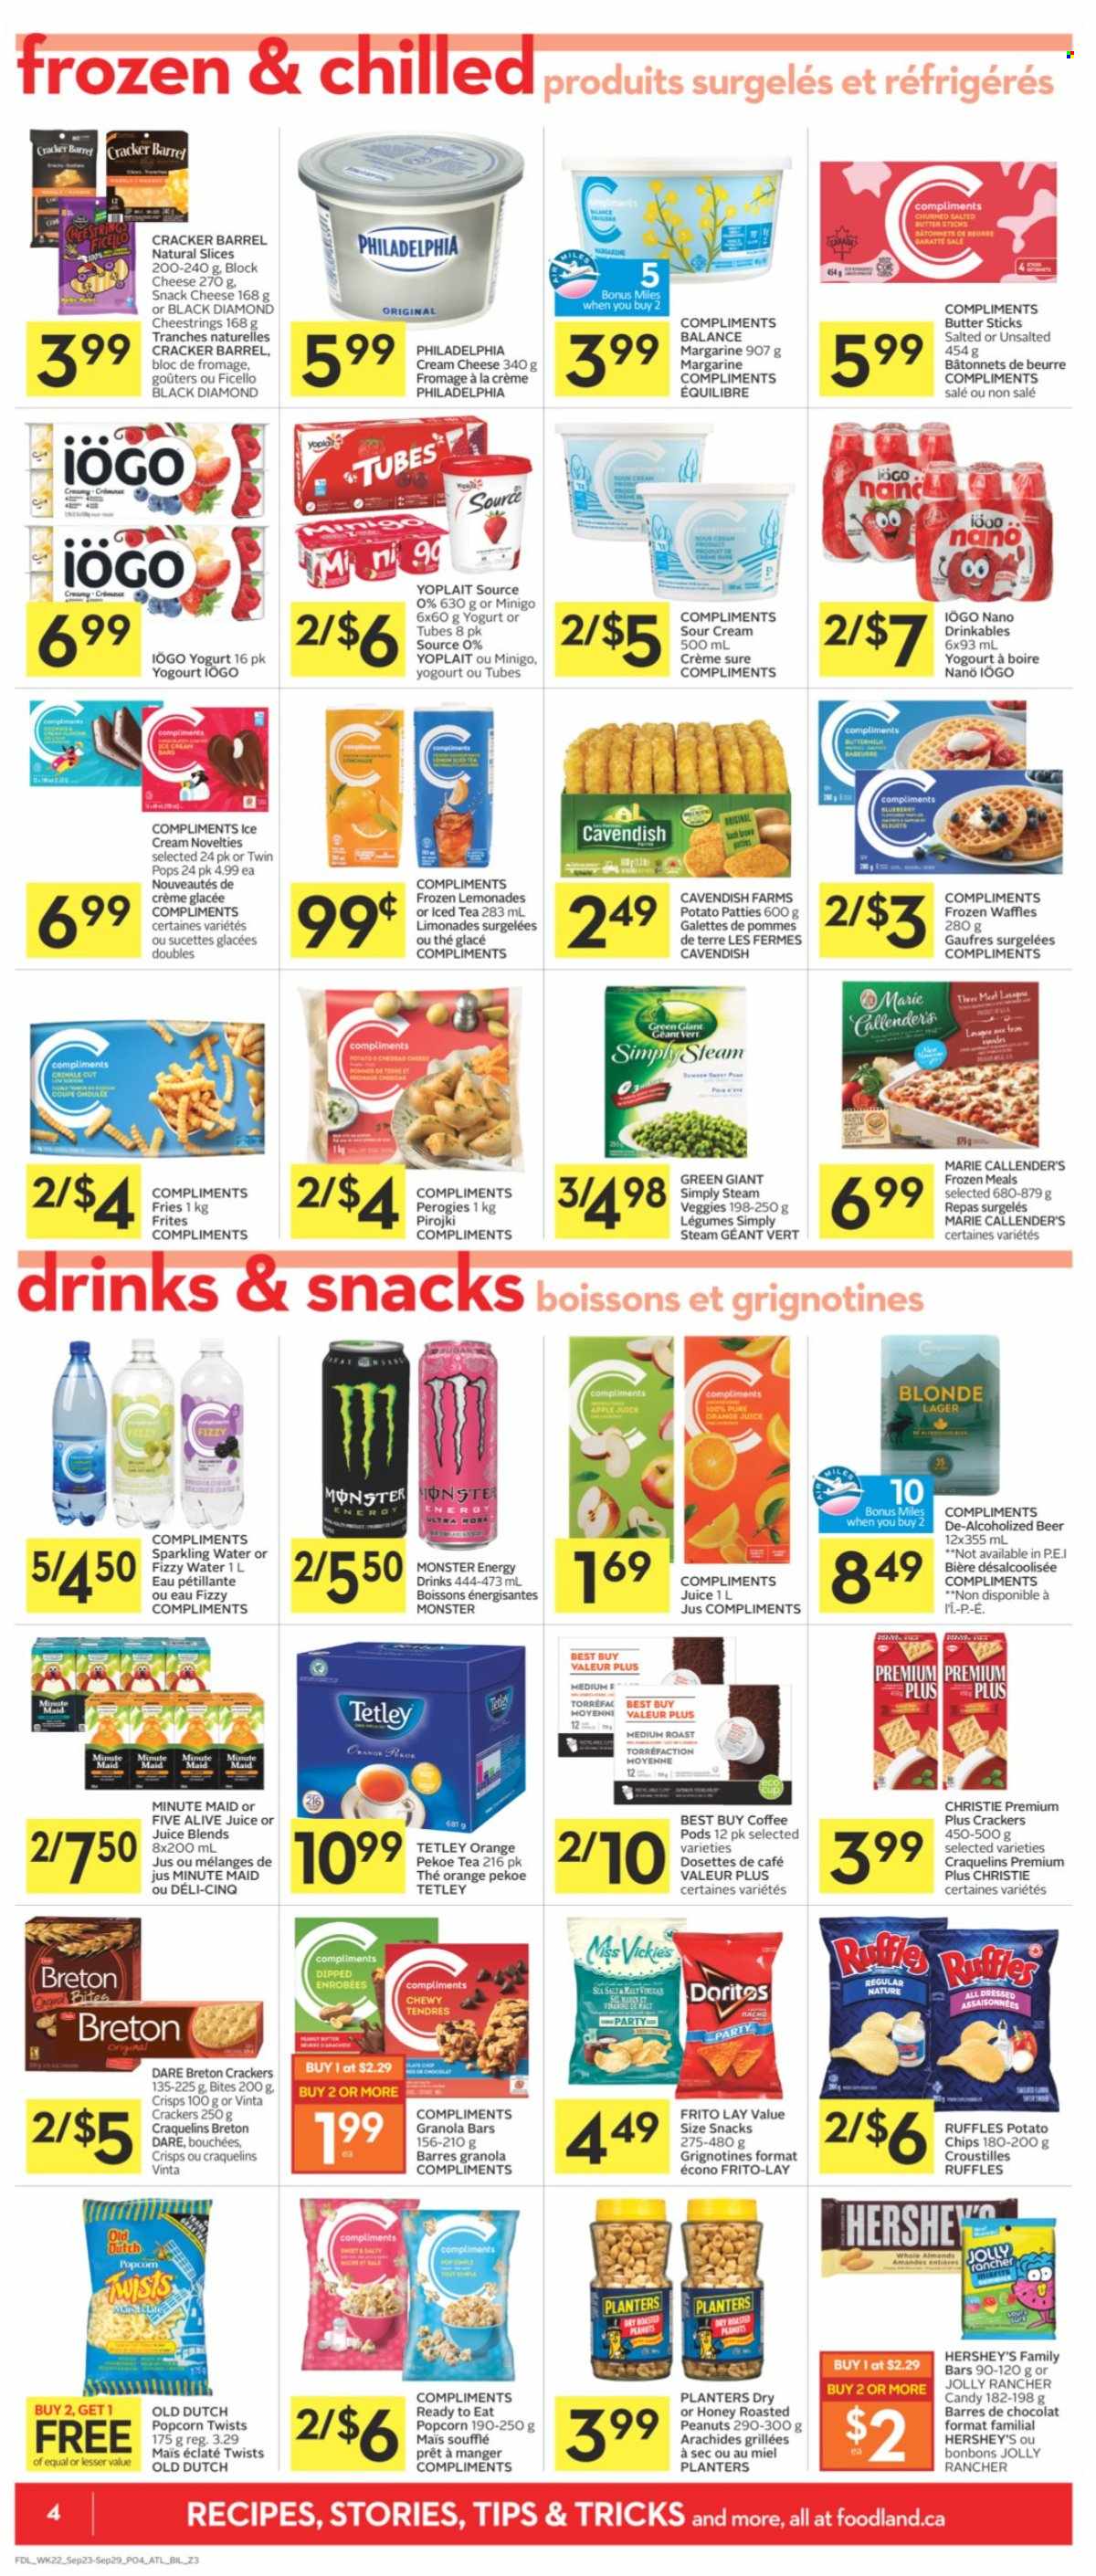 thumbnail - Co-op Flyer - September 23, 2021 - September 29, 2021 - Sales products - waffles, Marie Callender's, cream cheese, string cheese, cheese, yoghurt, Yoplait, butter, margarine, salted butter, sour cream, ice cream, Hershey's, potato fries, crackers, Doritos, potato chips, popcorn, Frito-Lay, Ruffles, granola bar, roasted peanuts, peanuts, Planters, orange juice, juice, energy drink, Monster, ice tea, Monster Energy, fruit punch, sparkling water, coffee pods, beer, Lager, Philadelphia. Page 4.